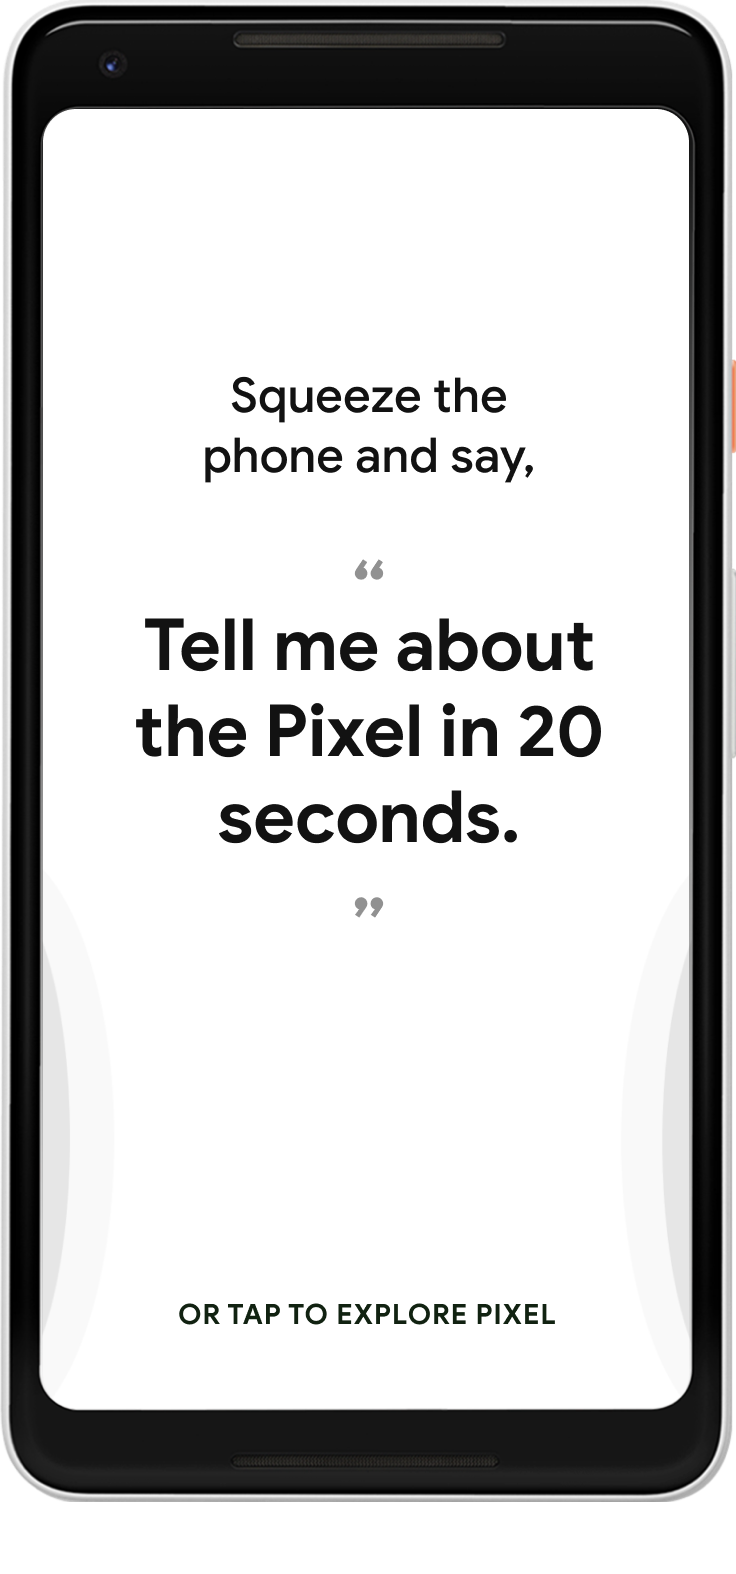 Instructions to 'Squeeze the phone and say, 'Tell me about the Pixel in 20 seconds''